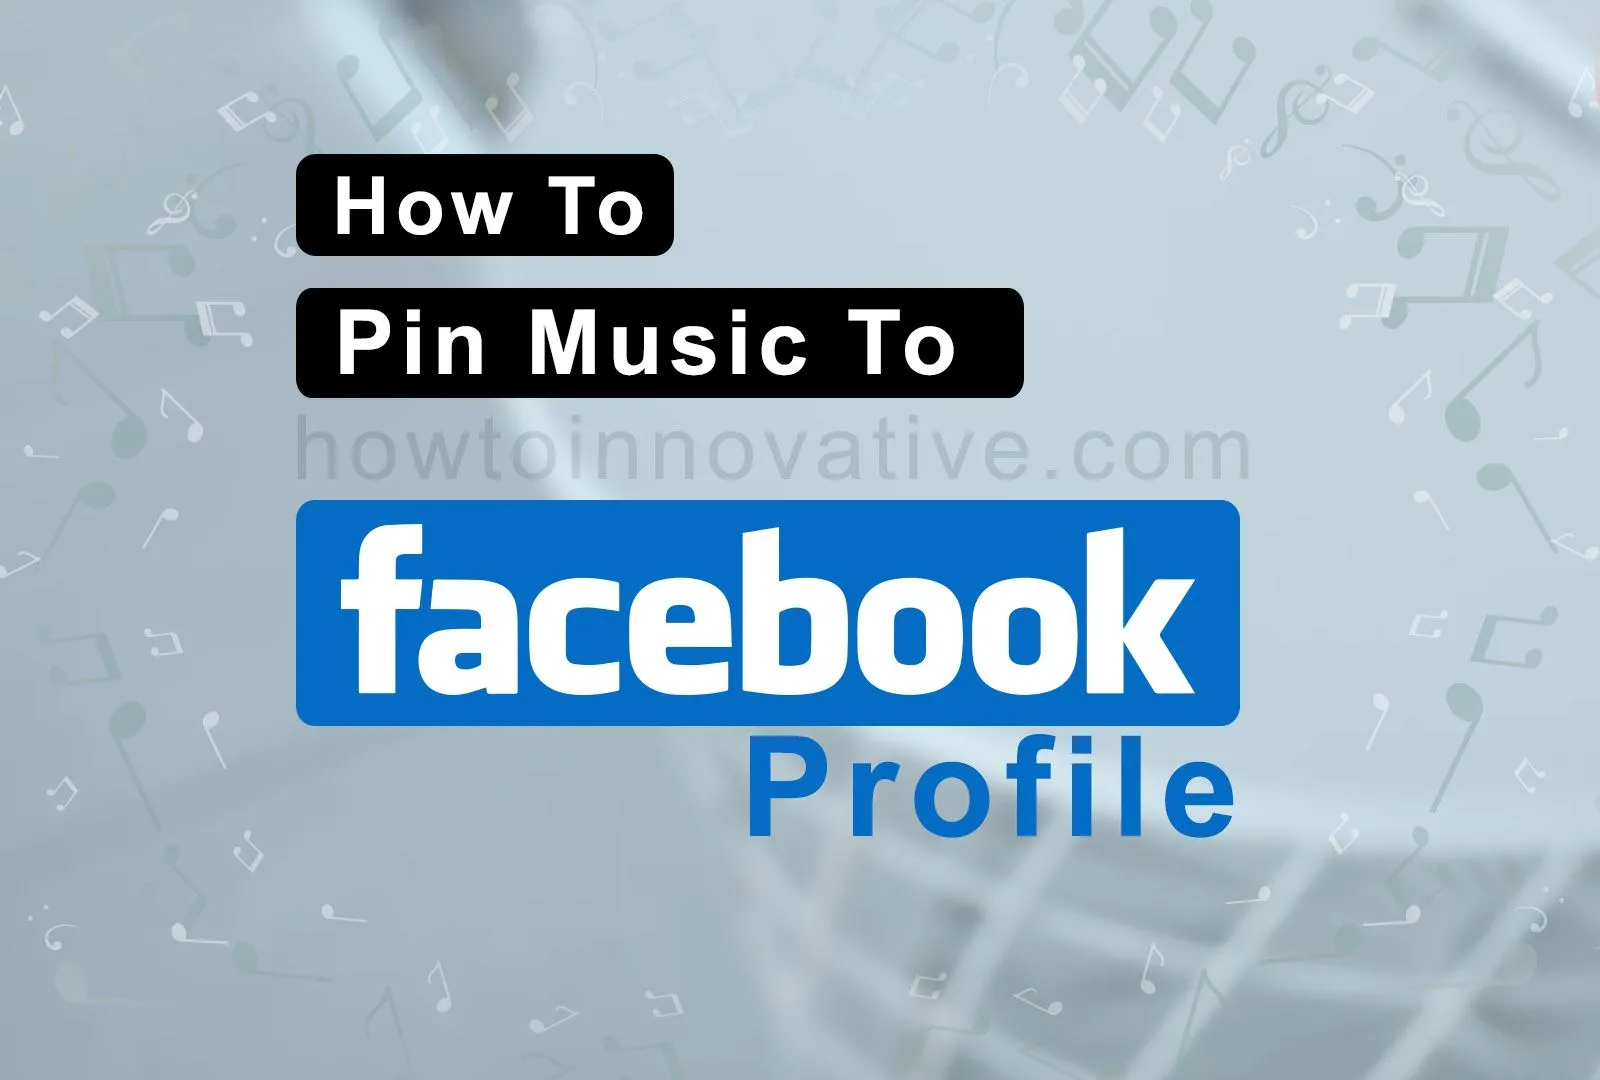 How To Pin Music To Facebook Profile